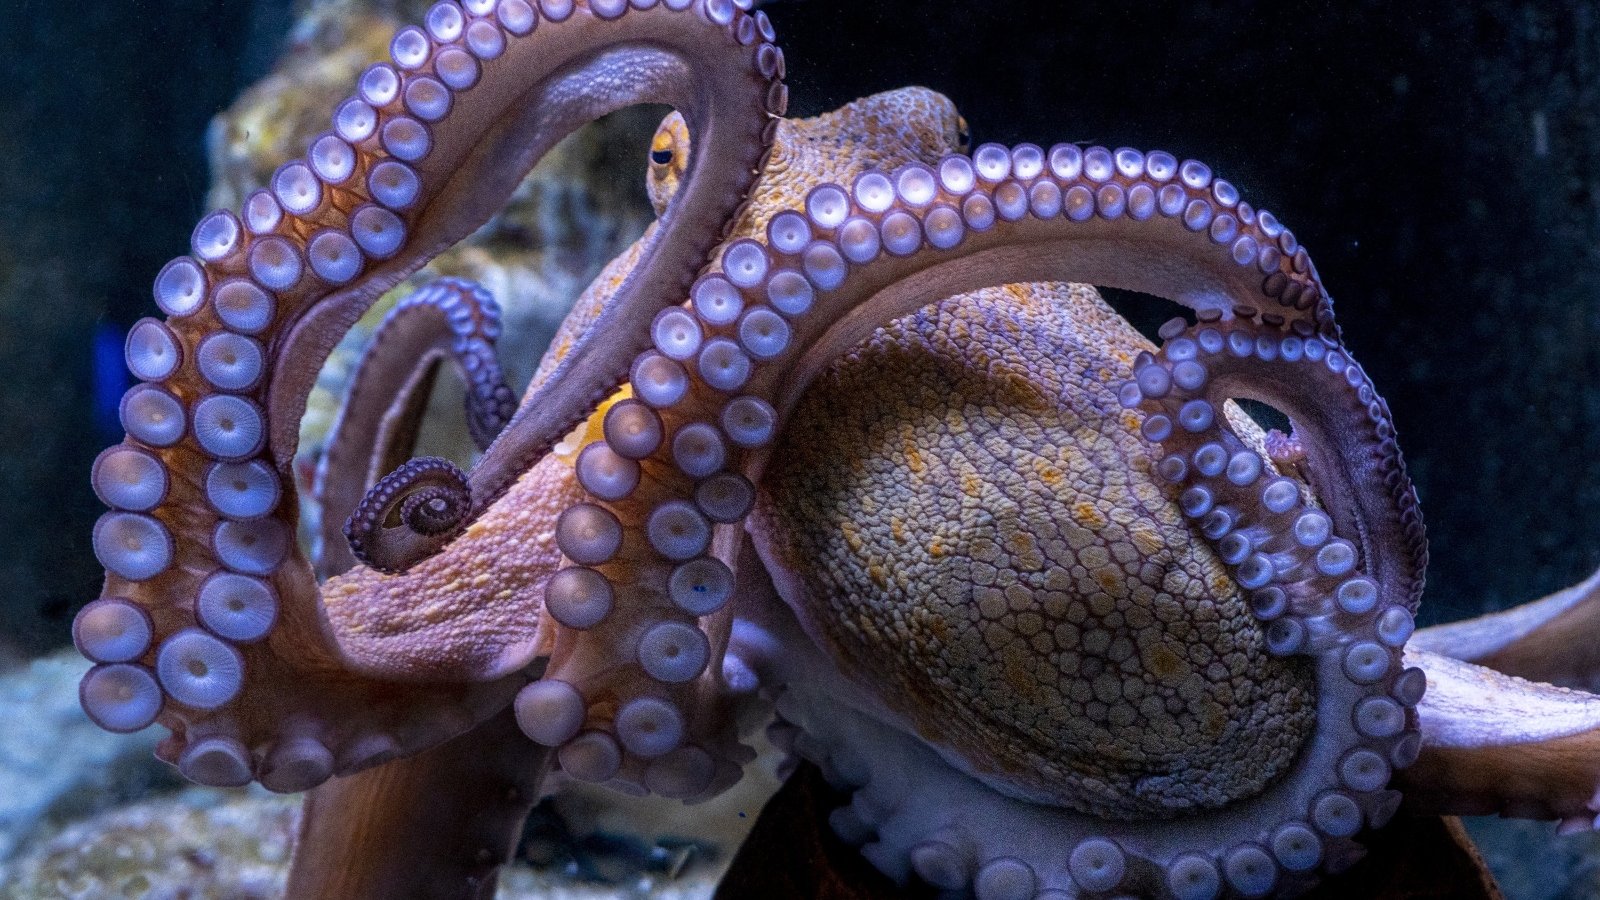 Experts Warn Opening The World's First Octopus Farm Is 'Wrong'